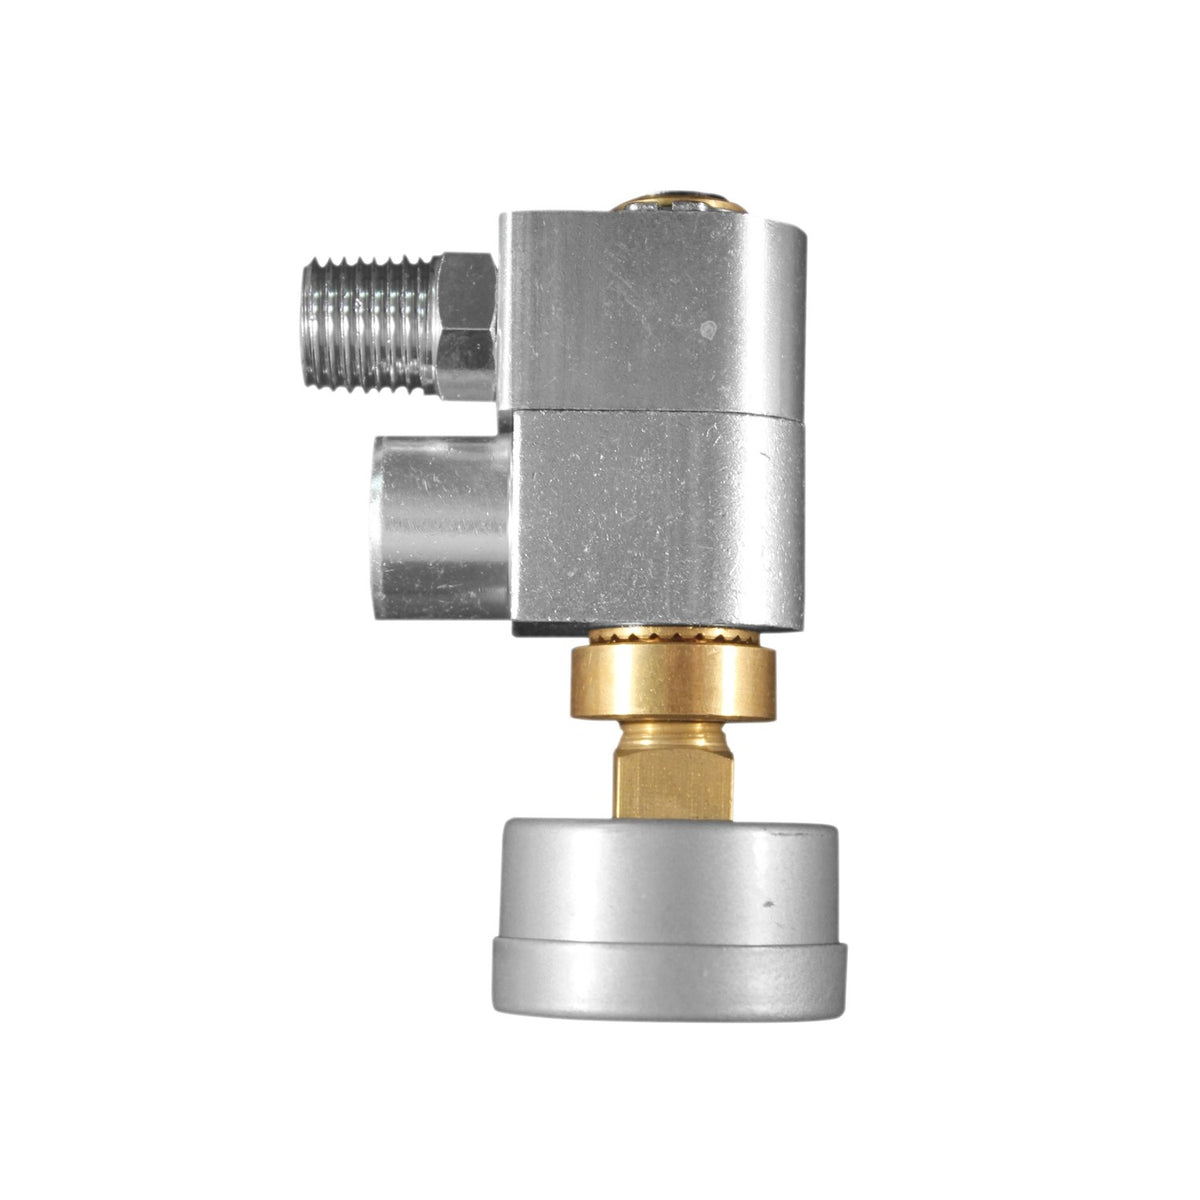 Milton S-657-3 1/4 NPT Swivel Hose Fitting with Flow Control and Gauge